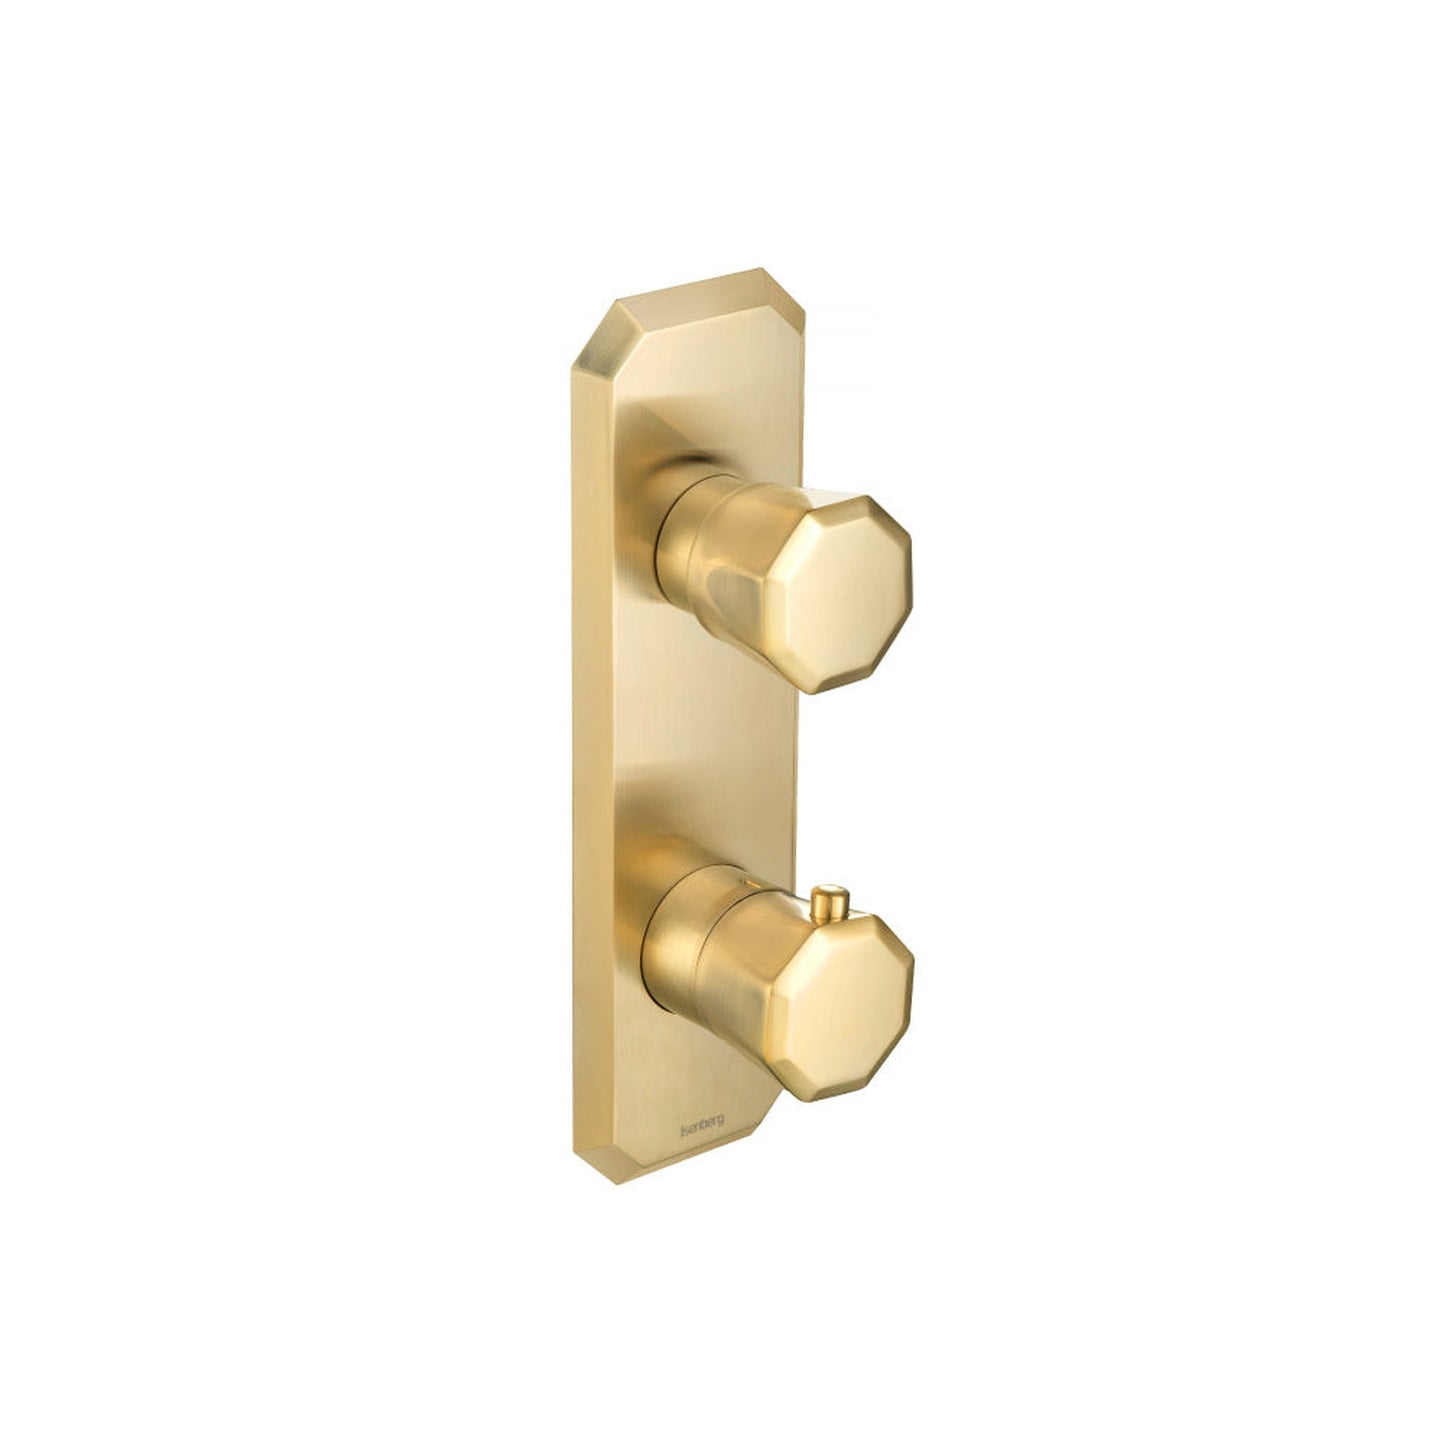 Isenberg Serie 230 3/4" Single Output Horizontal Thermostatic Shower Valve and Trim in Satin Brass (230.2720SB)